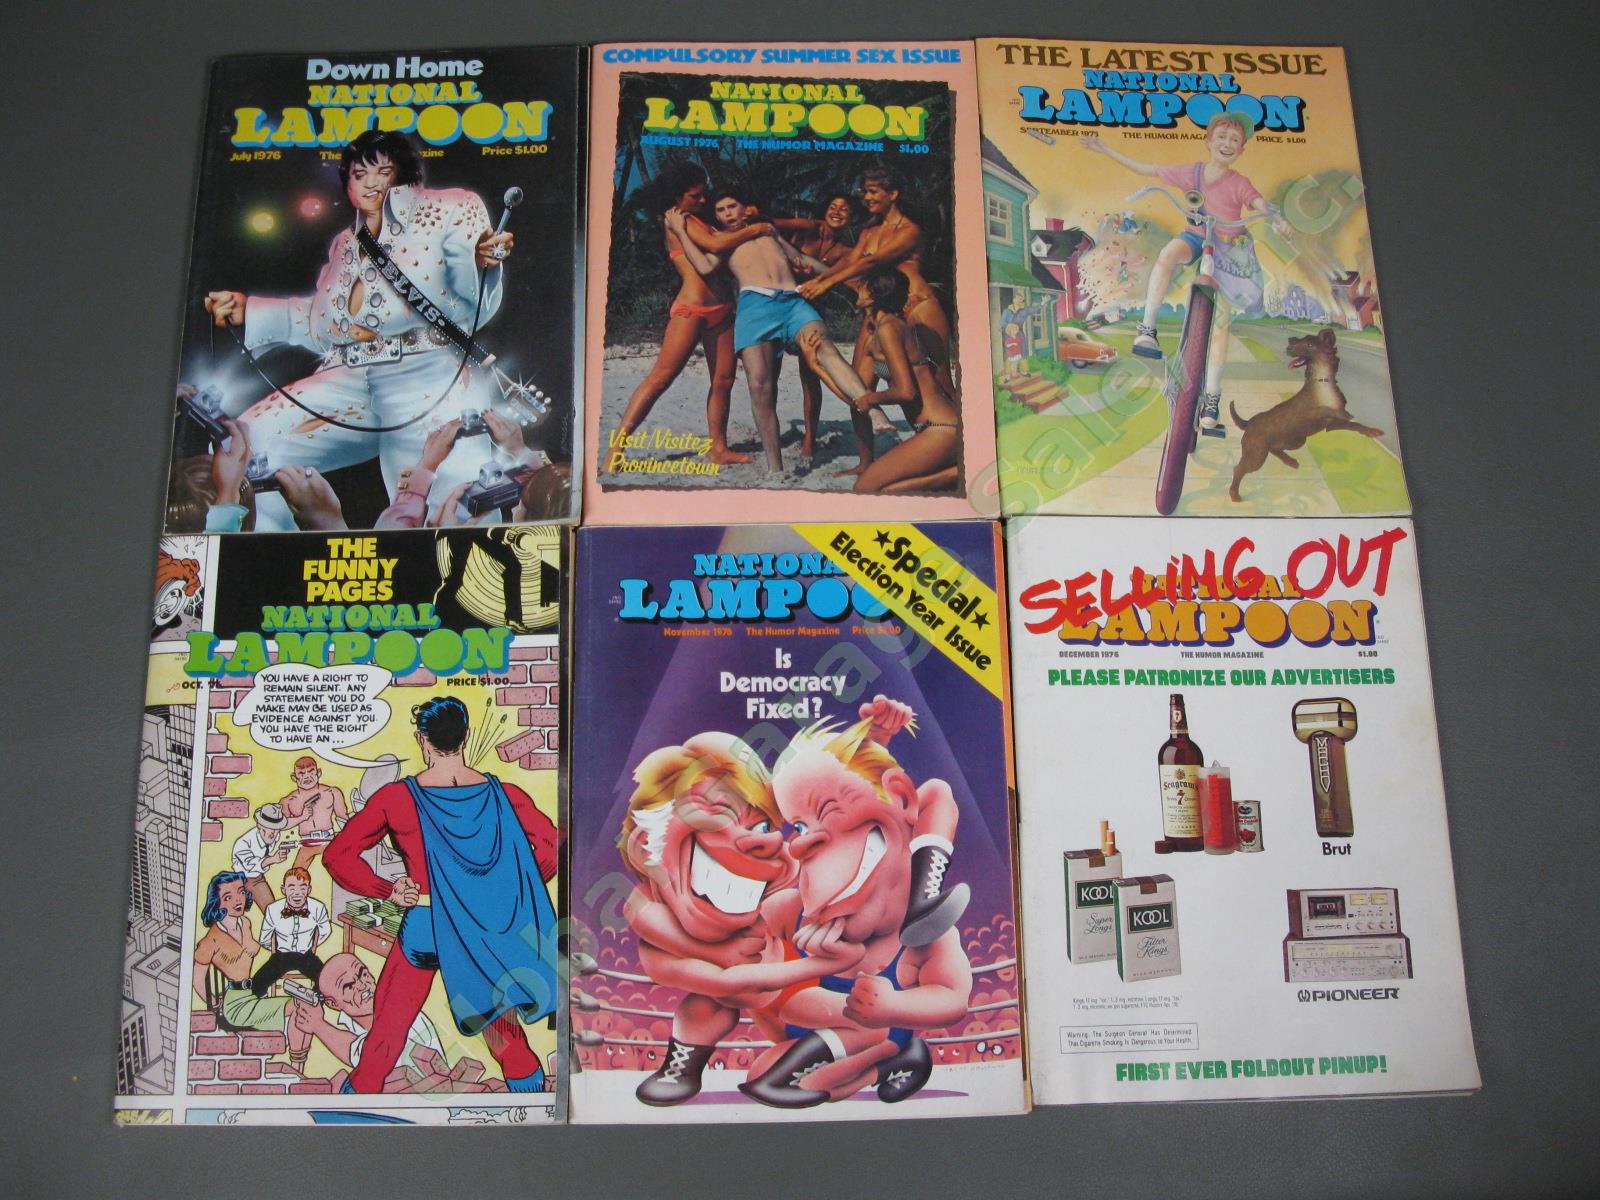 COMPLETE Vintage 1976 National Lampoon Humor Magazine 12 Issue Set Collection NR 2